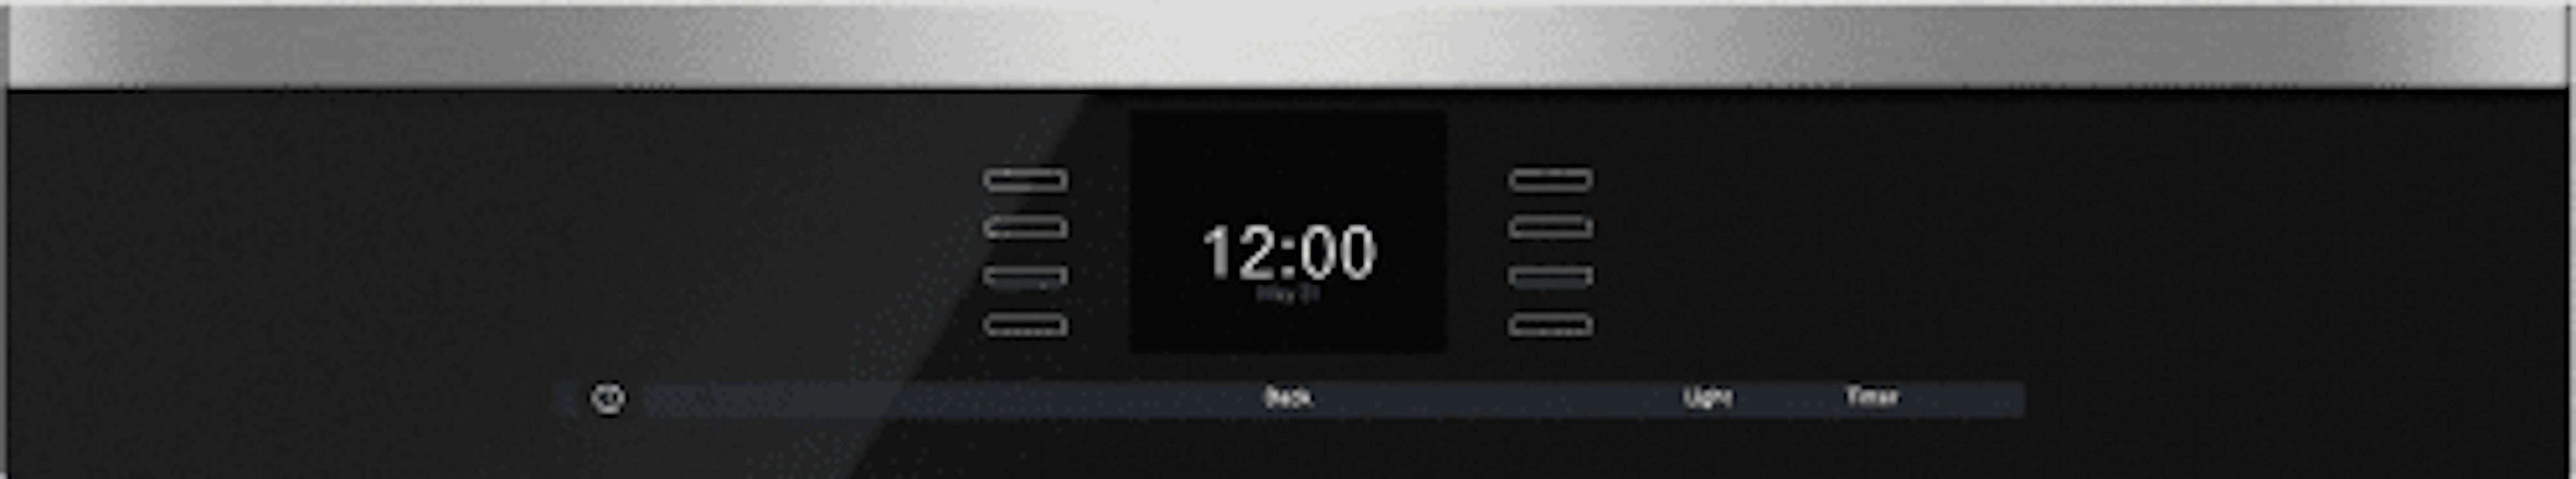 Miele - 1.52 cu. ft Single Wall Oven in Black - H 6600 BM